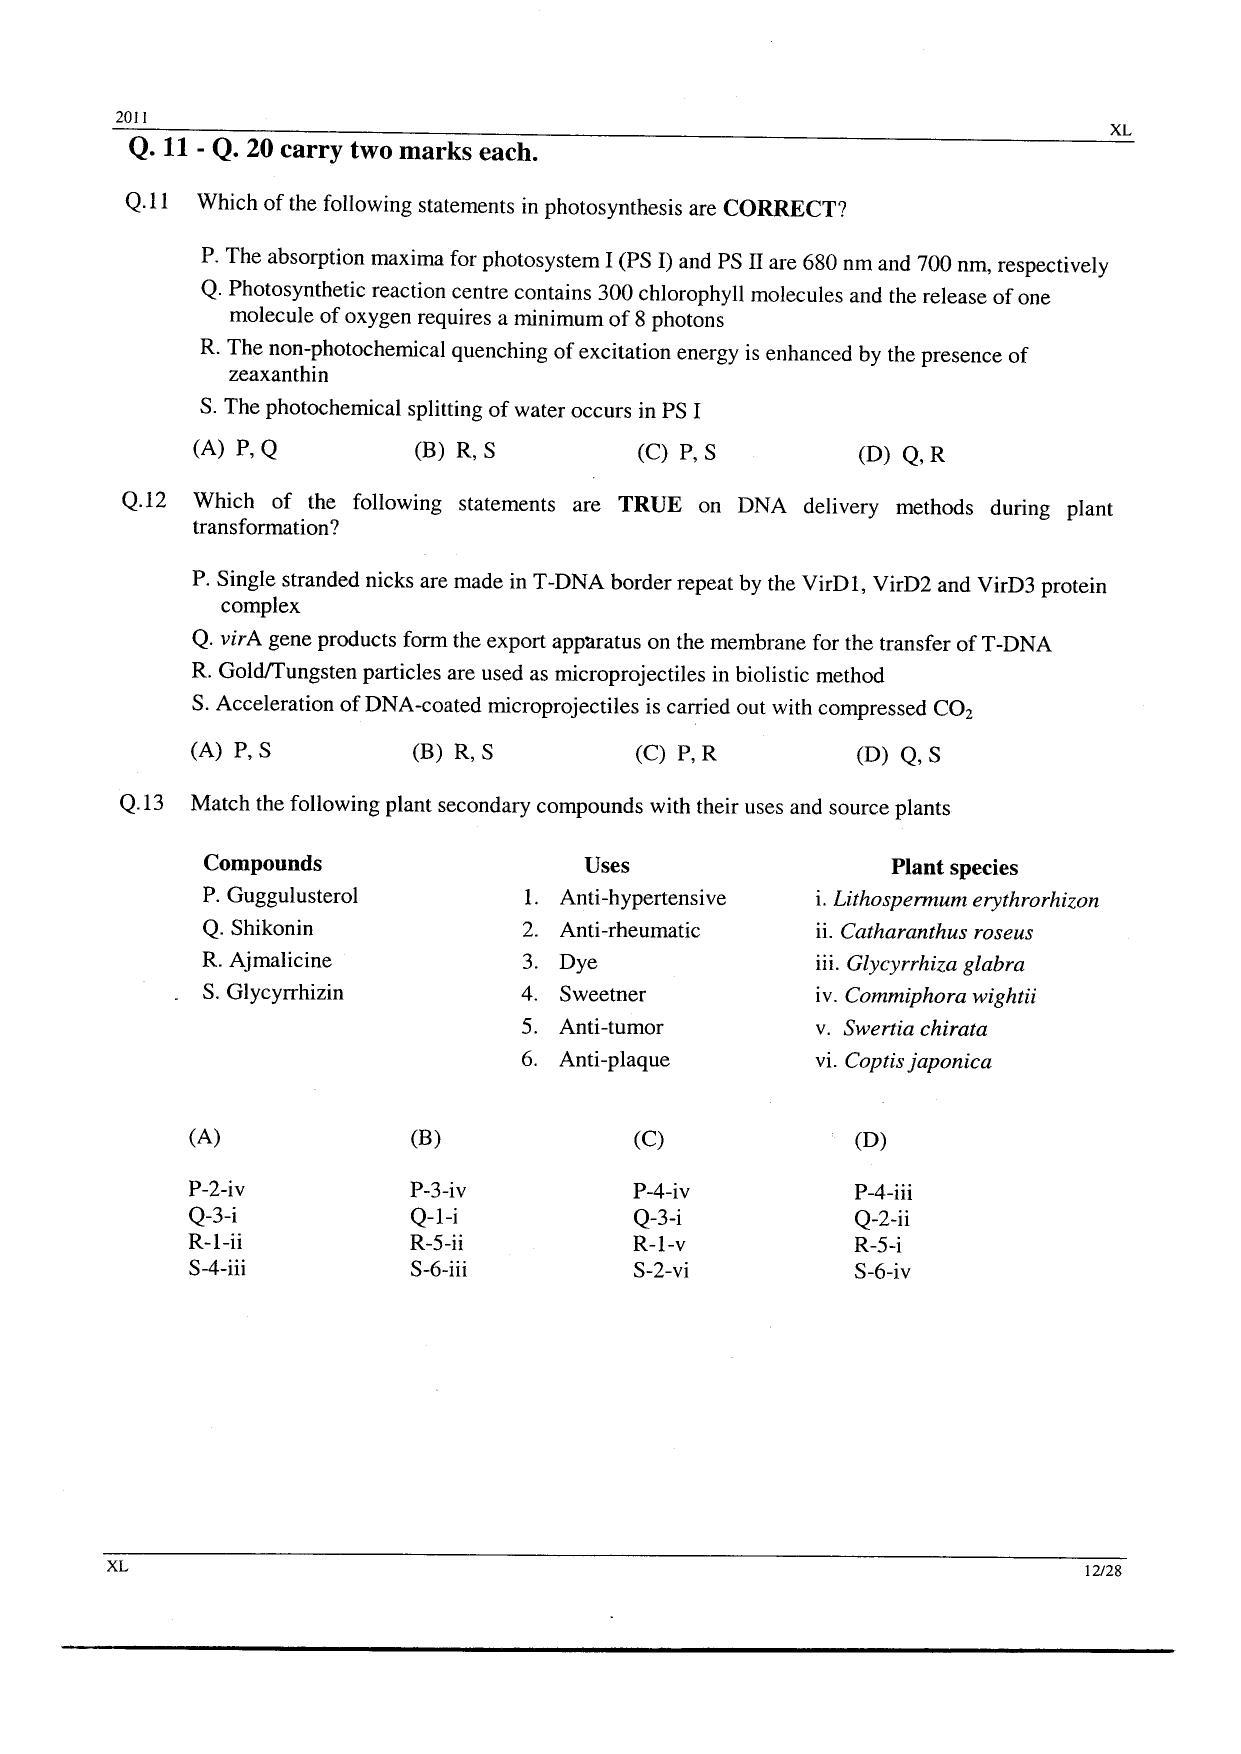 GATE 2011 Life Sciences (XL) Question Paper with Answer Key - Page 12